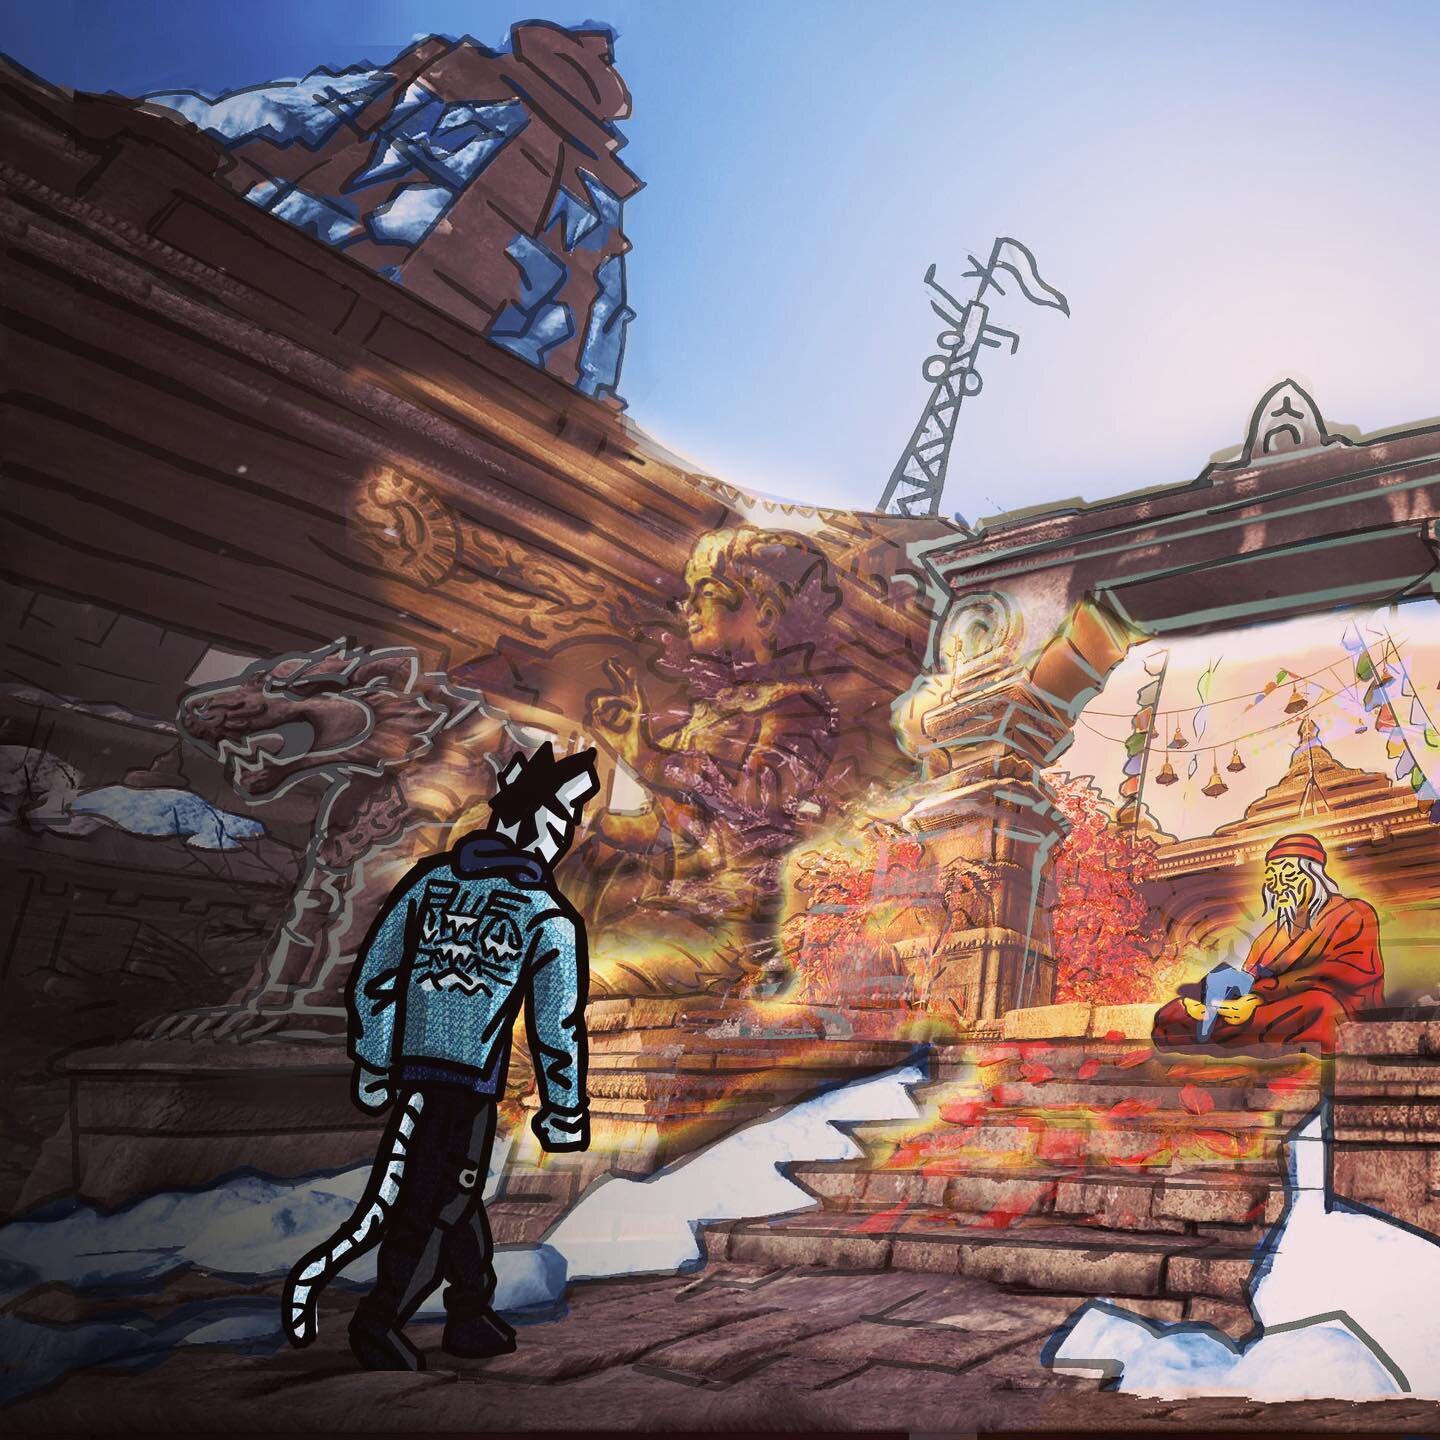 One of the most exciting elements of Soul Rebound is time- Thanks to the tigers&rsquo; past life connection, they are able to visit Khatsagon Temple thousands of years in the past.
As an interactive story, this opens up a unique dynamic that gives YO